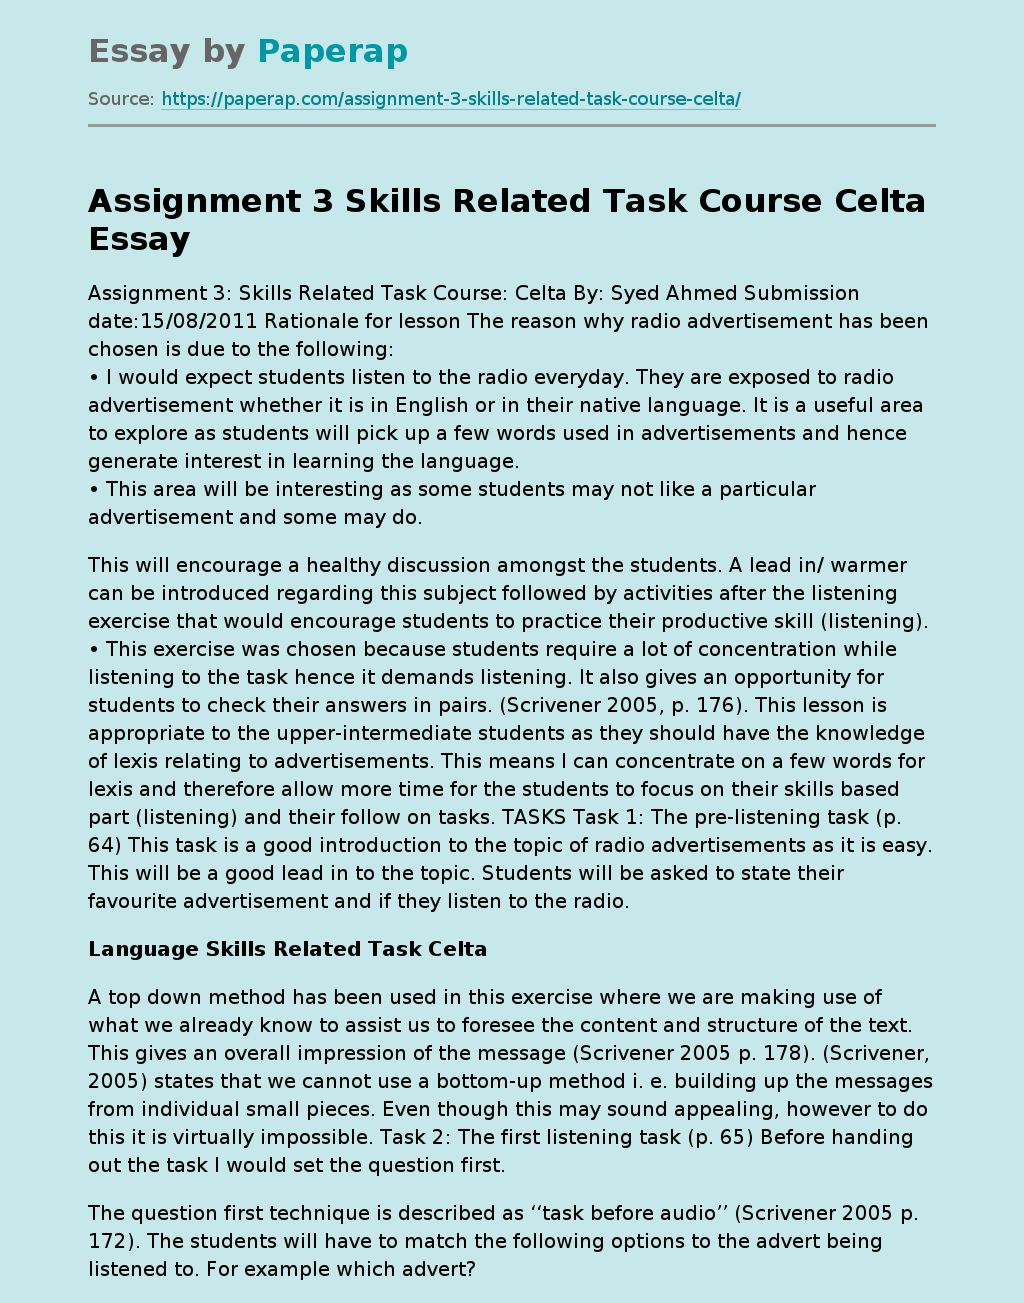 Assignment 3 Skills Related Task Course Celta